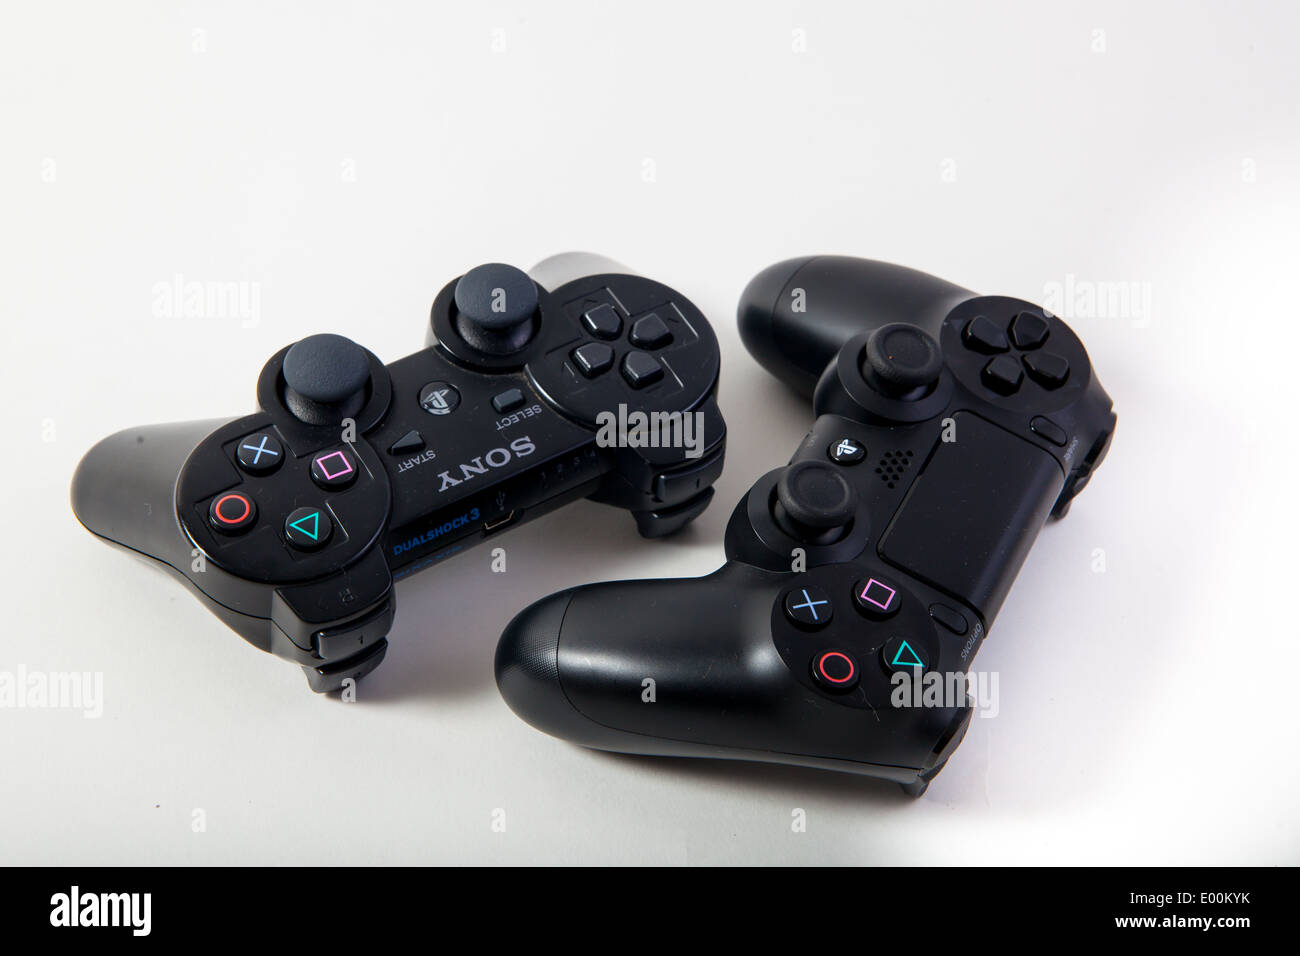 Sony Playstation 3 and 4 original authentic black gaming controllers on a white studio background. Stock Photo